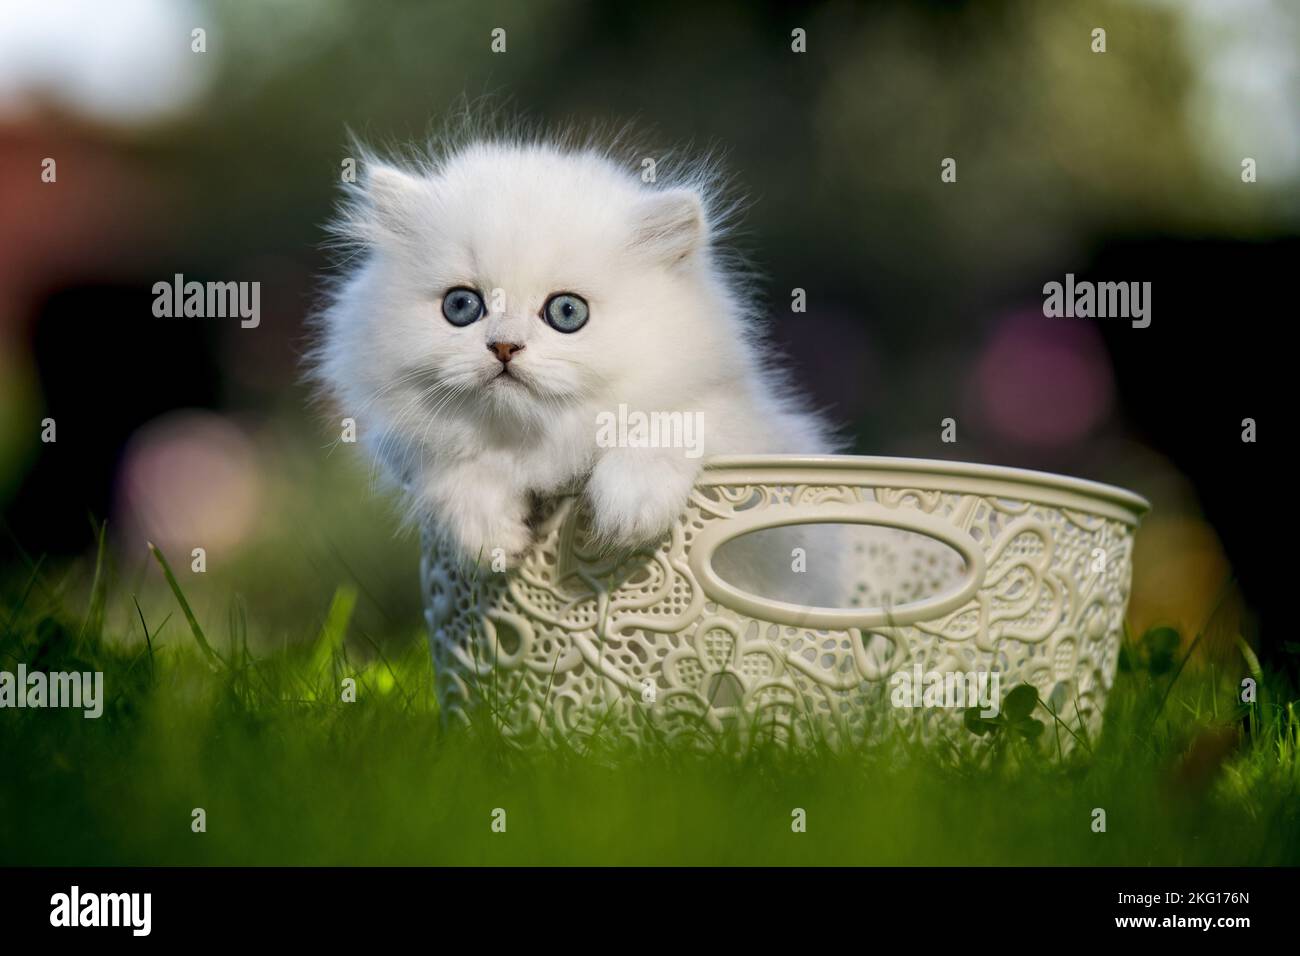 British long-haired kitten in a basket Stock Photo